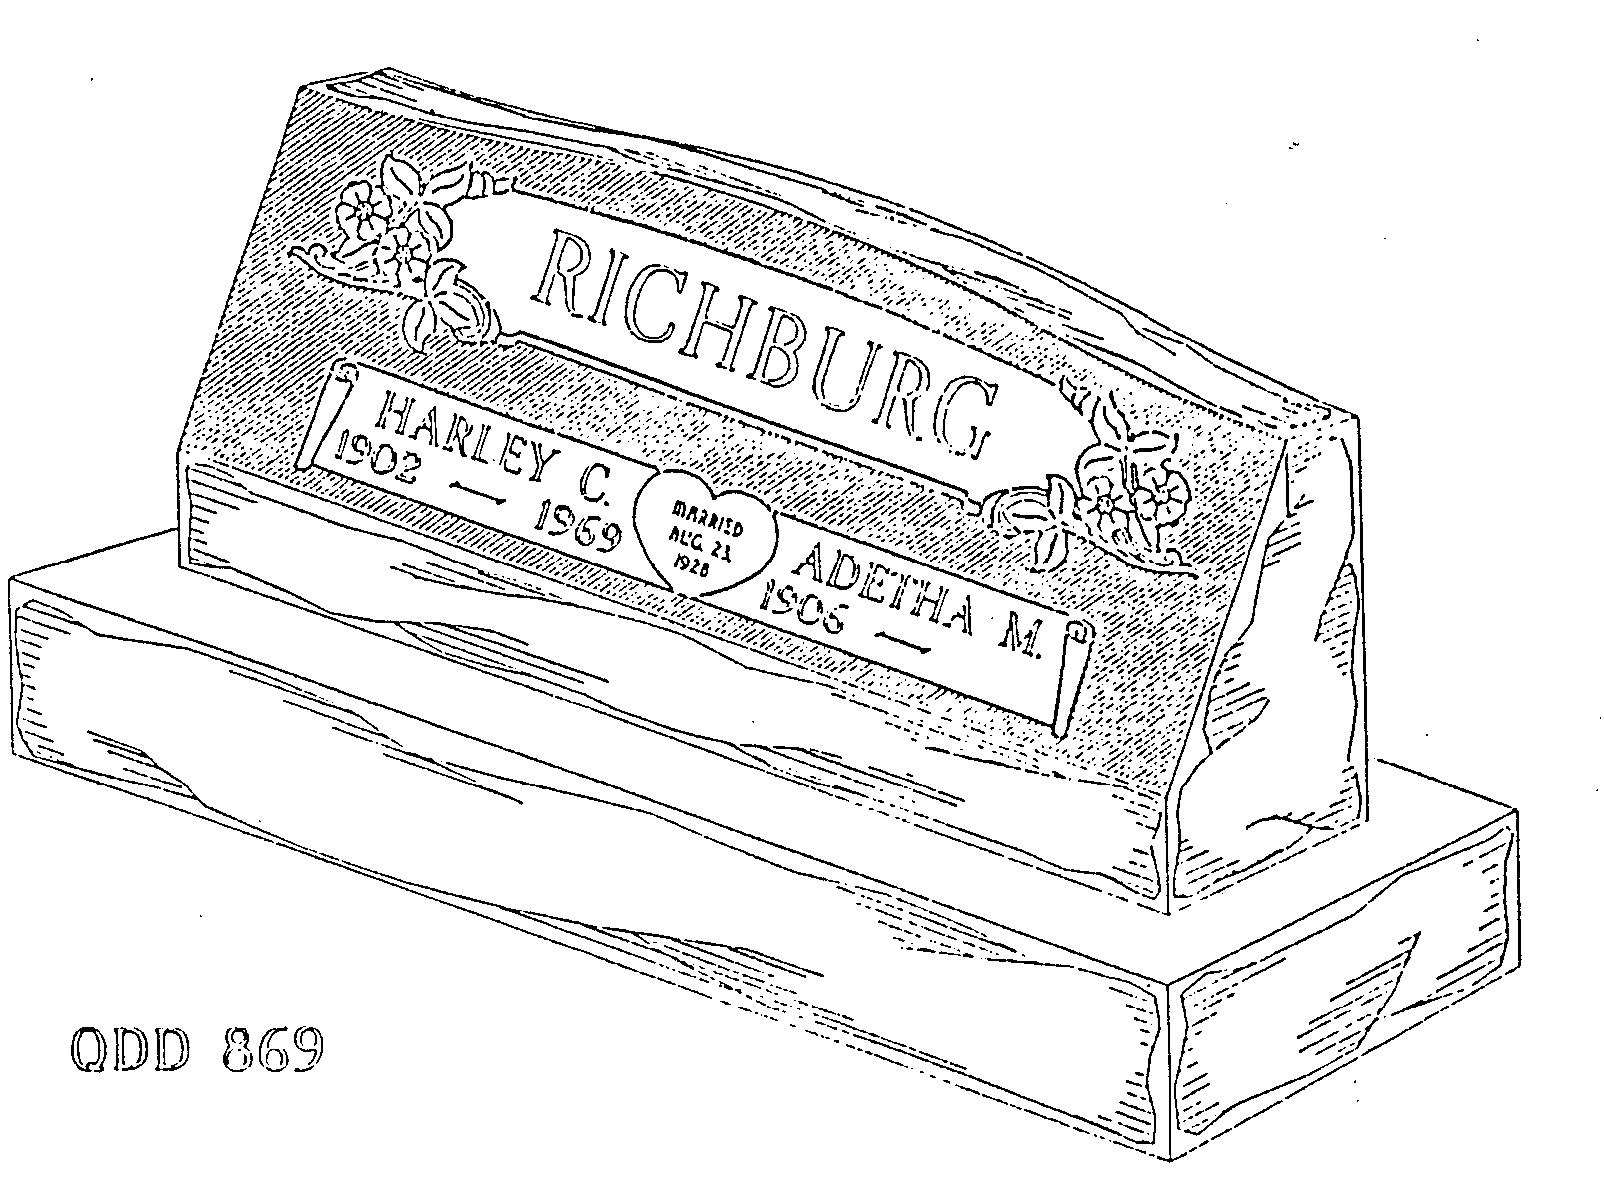 a black and white drawing of a gravestone with the name richburg on it